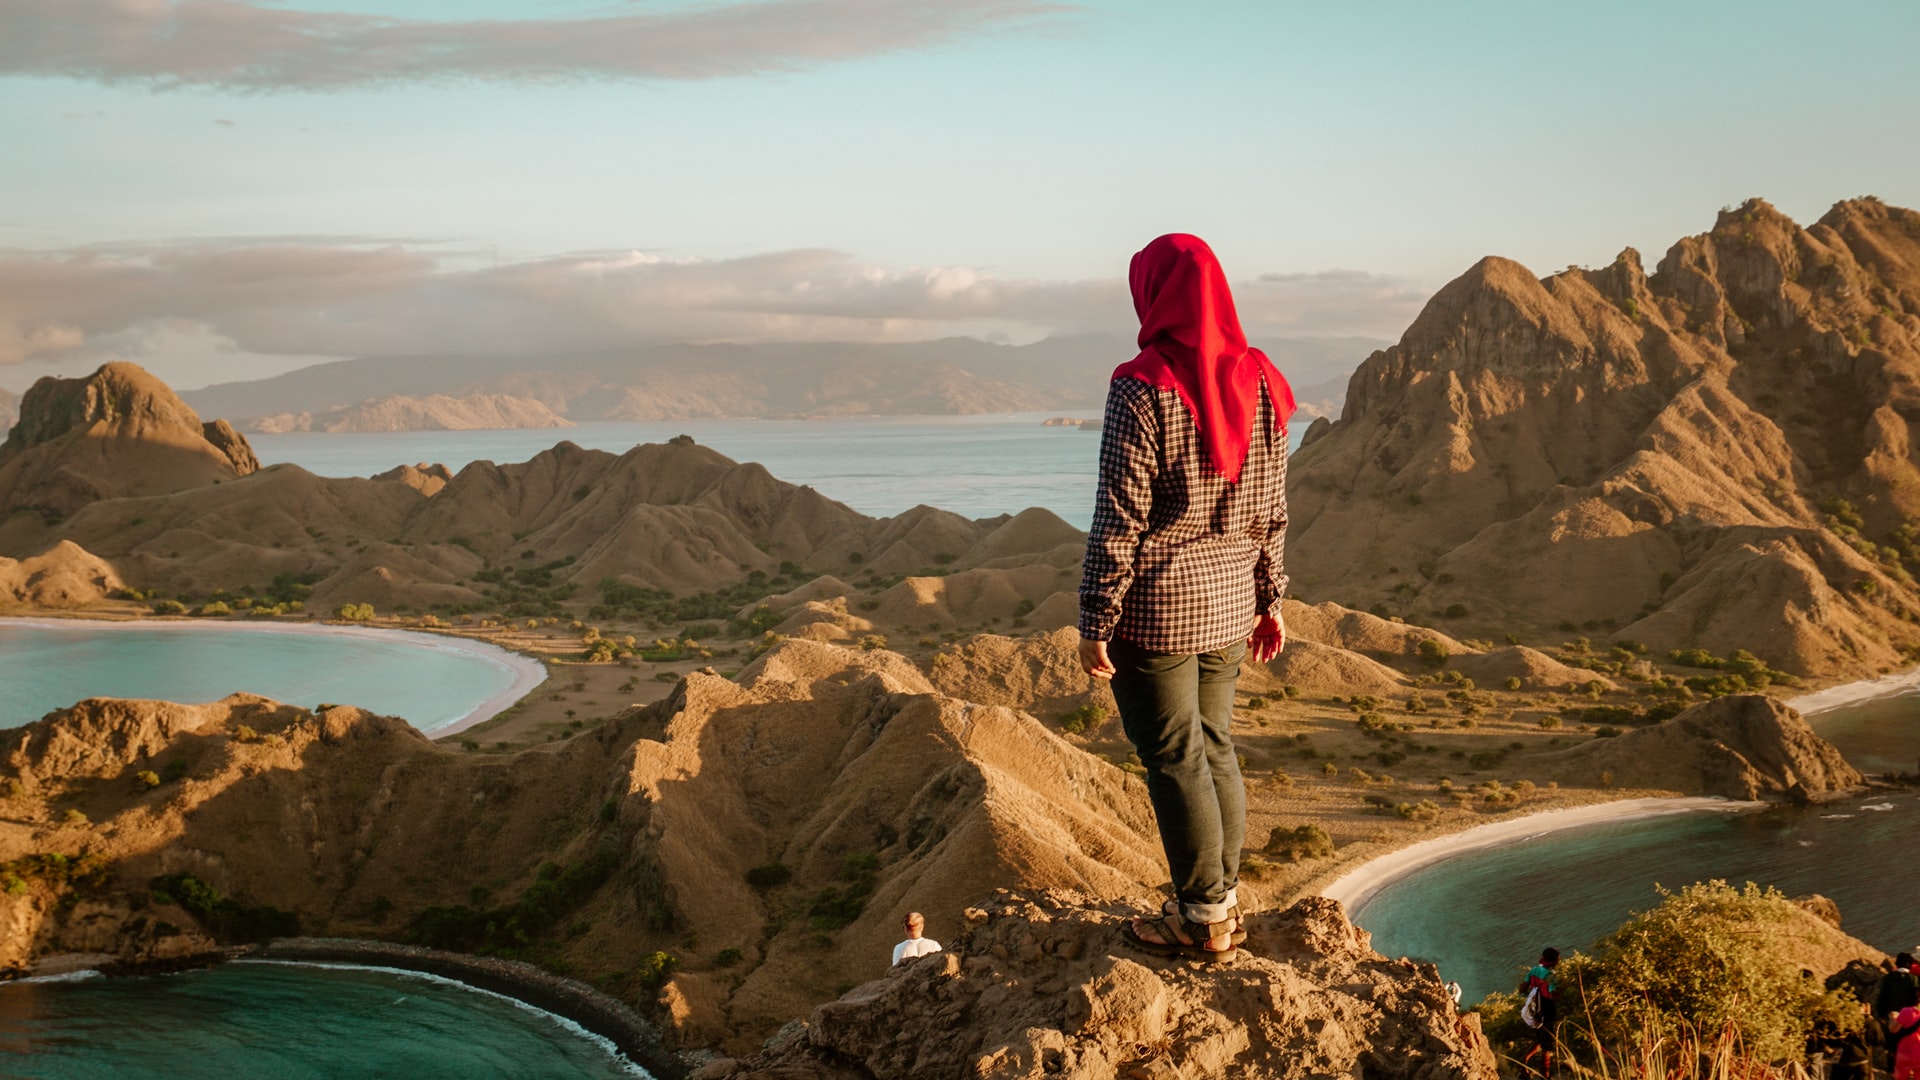 solitary woman in red headdress stands atop mountain peak overlooking lakes